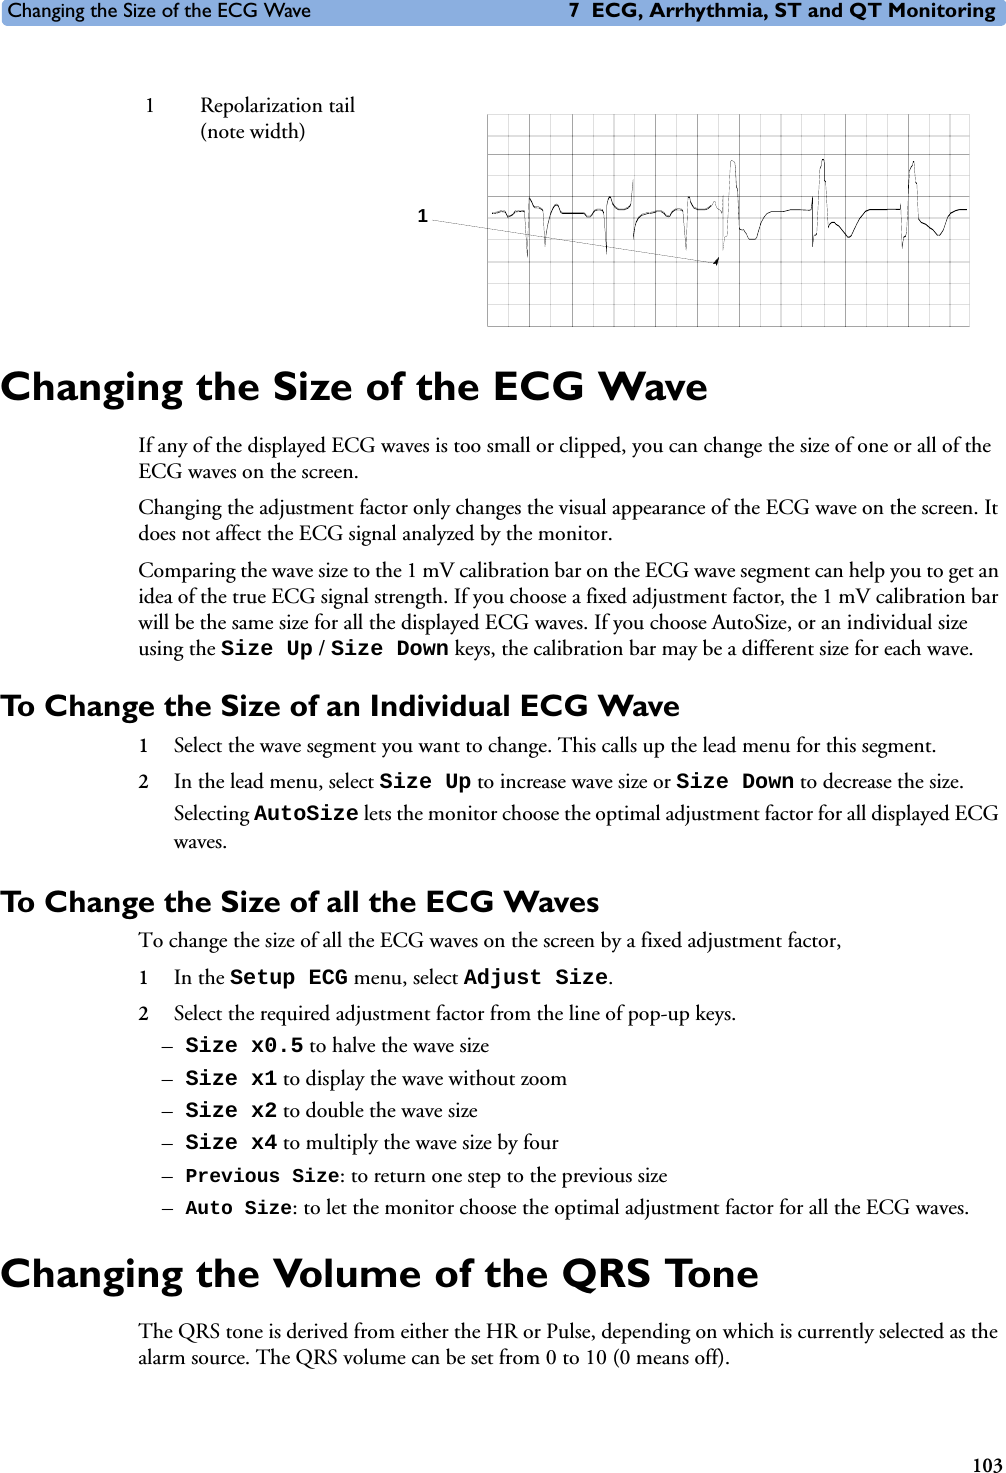 Changing the Size of the ECG Wave 7 ECG, Arrhythmia, ST and QT Monitoring103Changing the Size of the ECG WaveIf any of the displayed ECG waves is too small or clipped, you can change the size of one or all of the ECG waves on the screen.Changing the adjustment factor only changes the visual appearance of the ECG wave on the screen. It does not affect the ECG signal analyzed by the monitor.Comparing the wave size to the 1 mV calibration bar on the ECG wave segment can help you to get an idea of the true ECG signal strength. If you choose a fixed adjustment factor, the 1 mV calibration bar will be the same size for all the displayed ECG waves. If you choose AutoSize, or an individual size using the Size Up / Size Down keys, the calibration bar may be a different size for each wave. To Change the Size of an Individual ECG Wave1Select the wave segment you want to change. This calls up the lead menu for this segment.2In the lead menu, select Size Up to increase wave size or Size Down to decrease the size.Selecting AutoSize lets the monitor choose the optimal adjustment factor for all displayed ECG waves.To Change the Size of all the ECG Waves To change the size of all the ECG waves on the screen by a fixed adjustment factor, 1In the Setup ECG menu, select Adjust Size. 2Select the required adjustment factor from the line of pop-up keys. –Size x0.5 to halve the wave size –Size x1 to display the wave without zoom–Size x2 to double the wave size –Size x4 to multiply the wave size by four–Previous Size: to return one step to the previous size–Auto Size: to let the monitor choose the optimal adjustment factor for all the ECG waves. Changing the Volume of the QRS ToneThe QRS tone is derived from either the HR or Pulse, depending on which is currently selected as the alarm source. The QRS volume can be set from 0 to 10 (0 means off). 1 Repolarization tail (note width)1